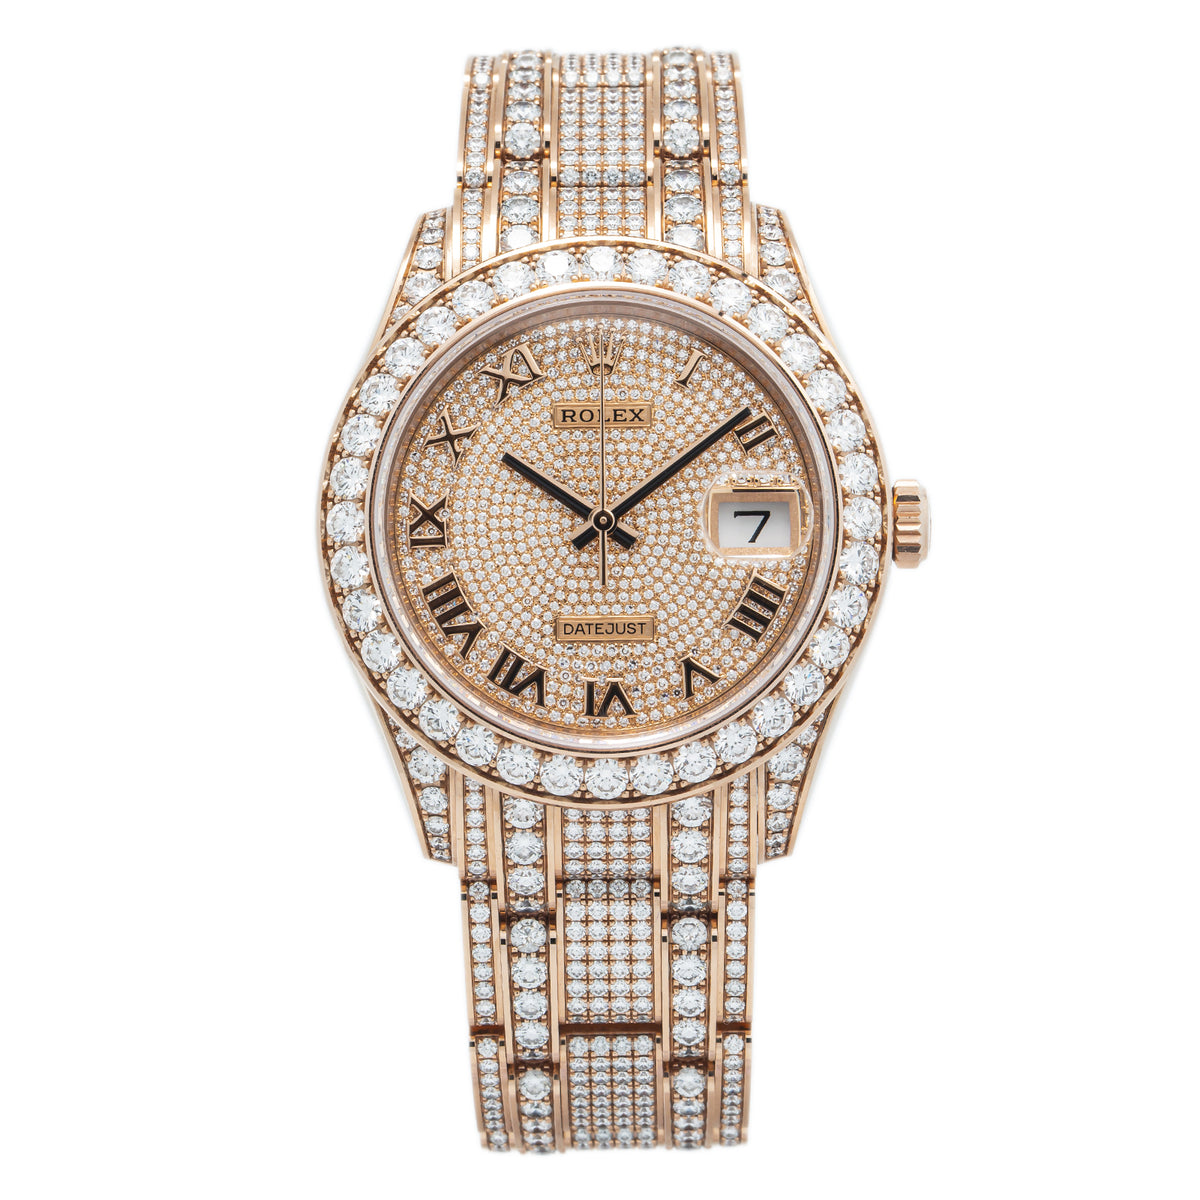 Rolex Datejust Pearlmaster 86405RBR New Everose Gold Diamond Watch 39mm Complete